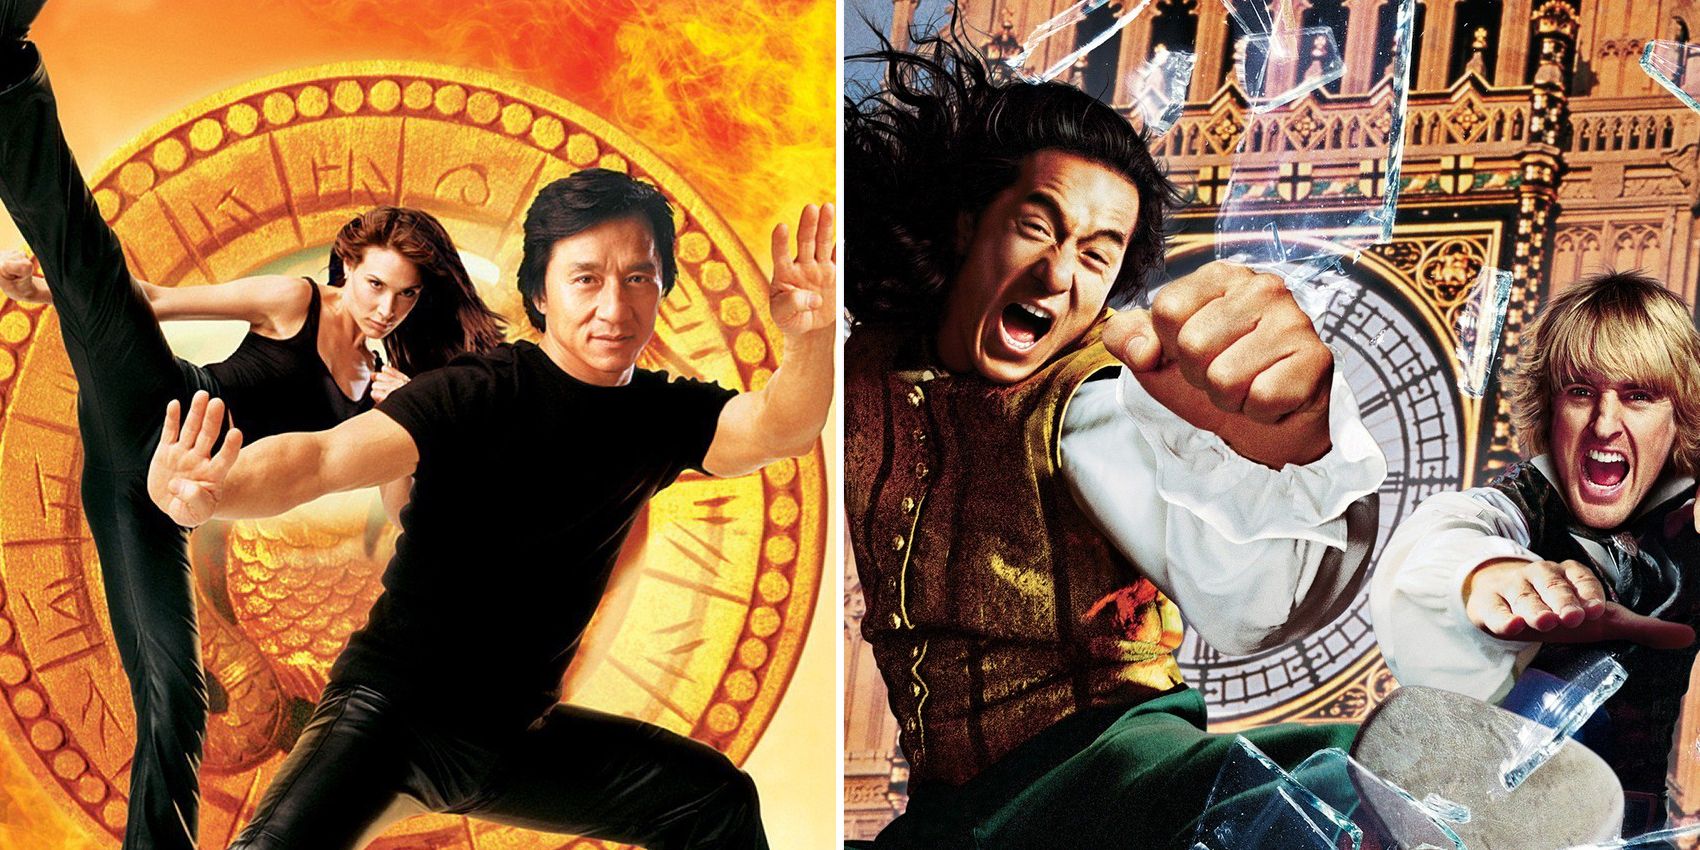 Jackie Chan featured The Medallion Shanghai Knights